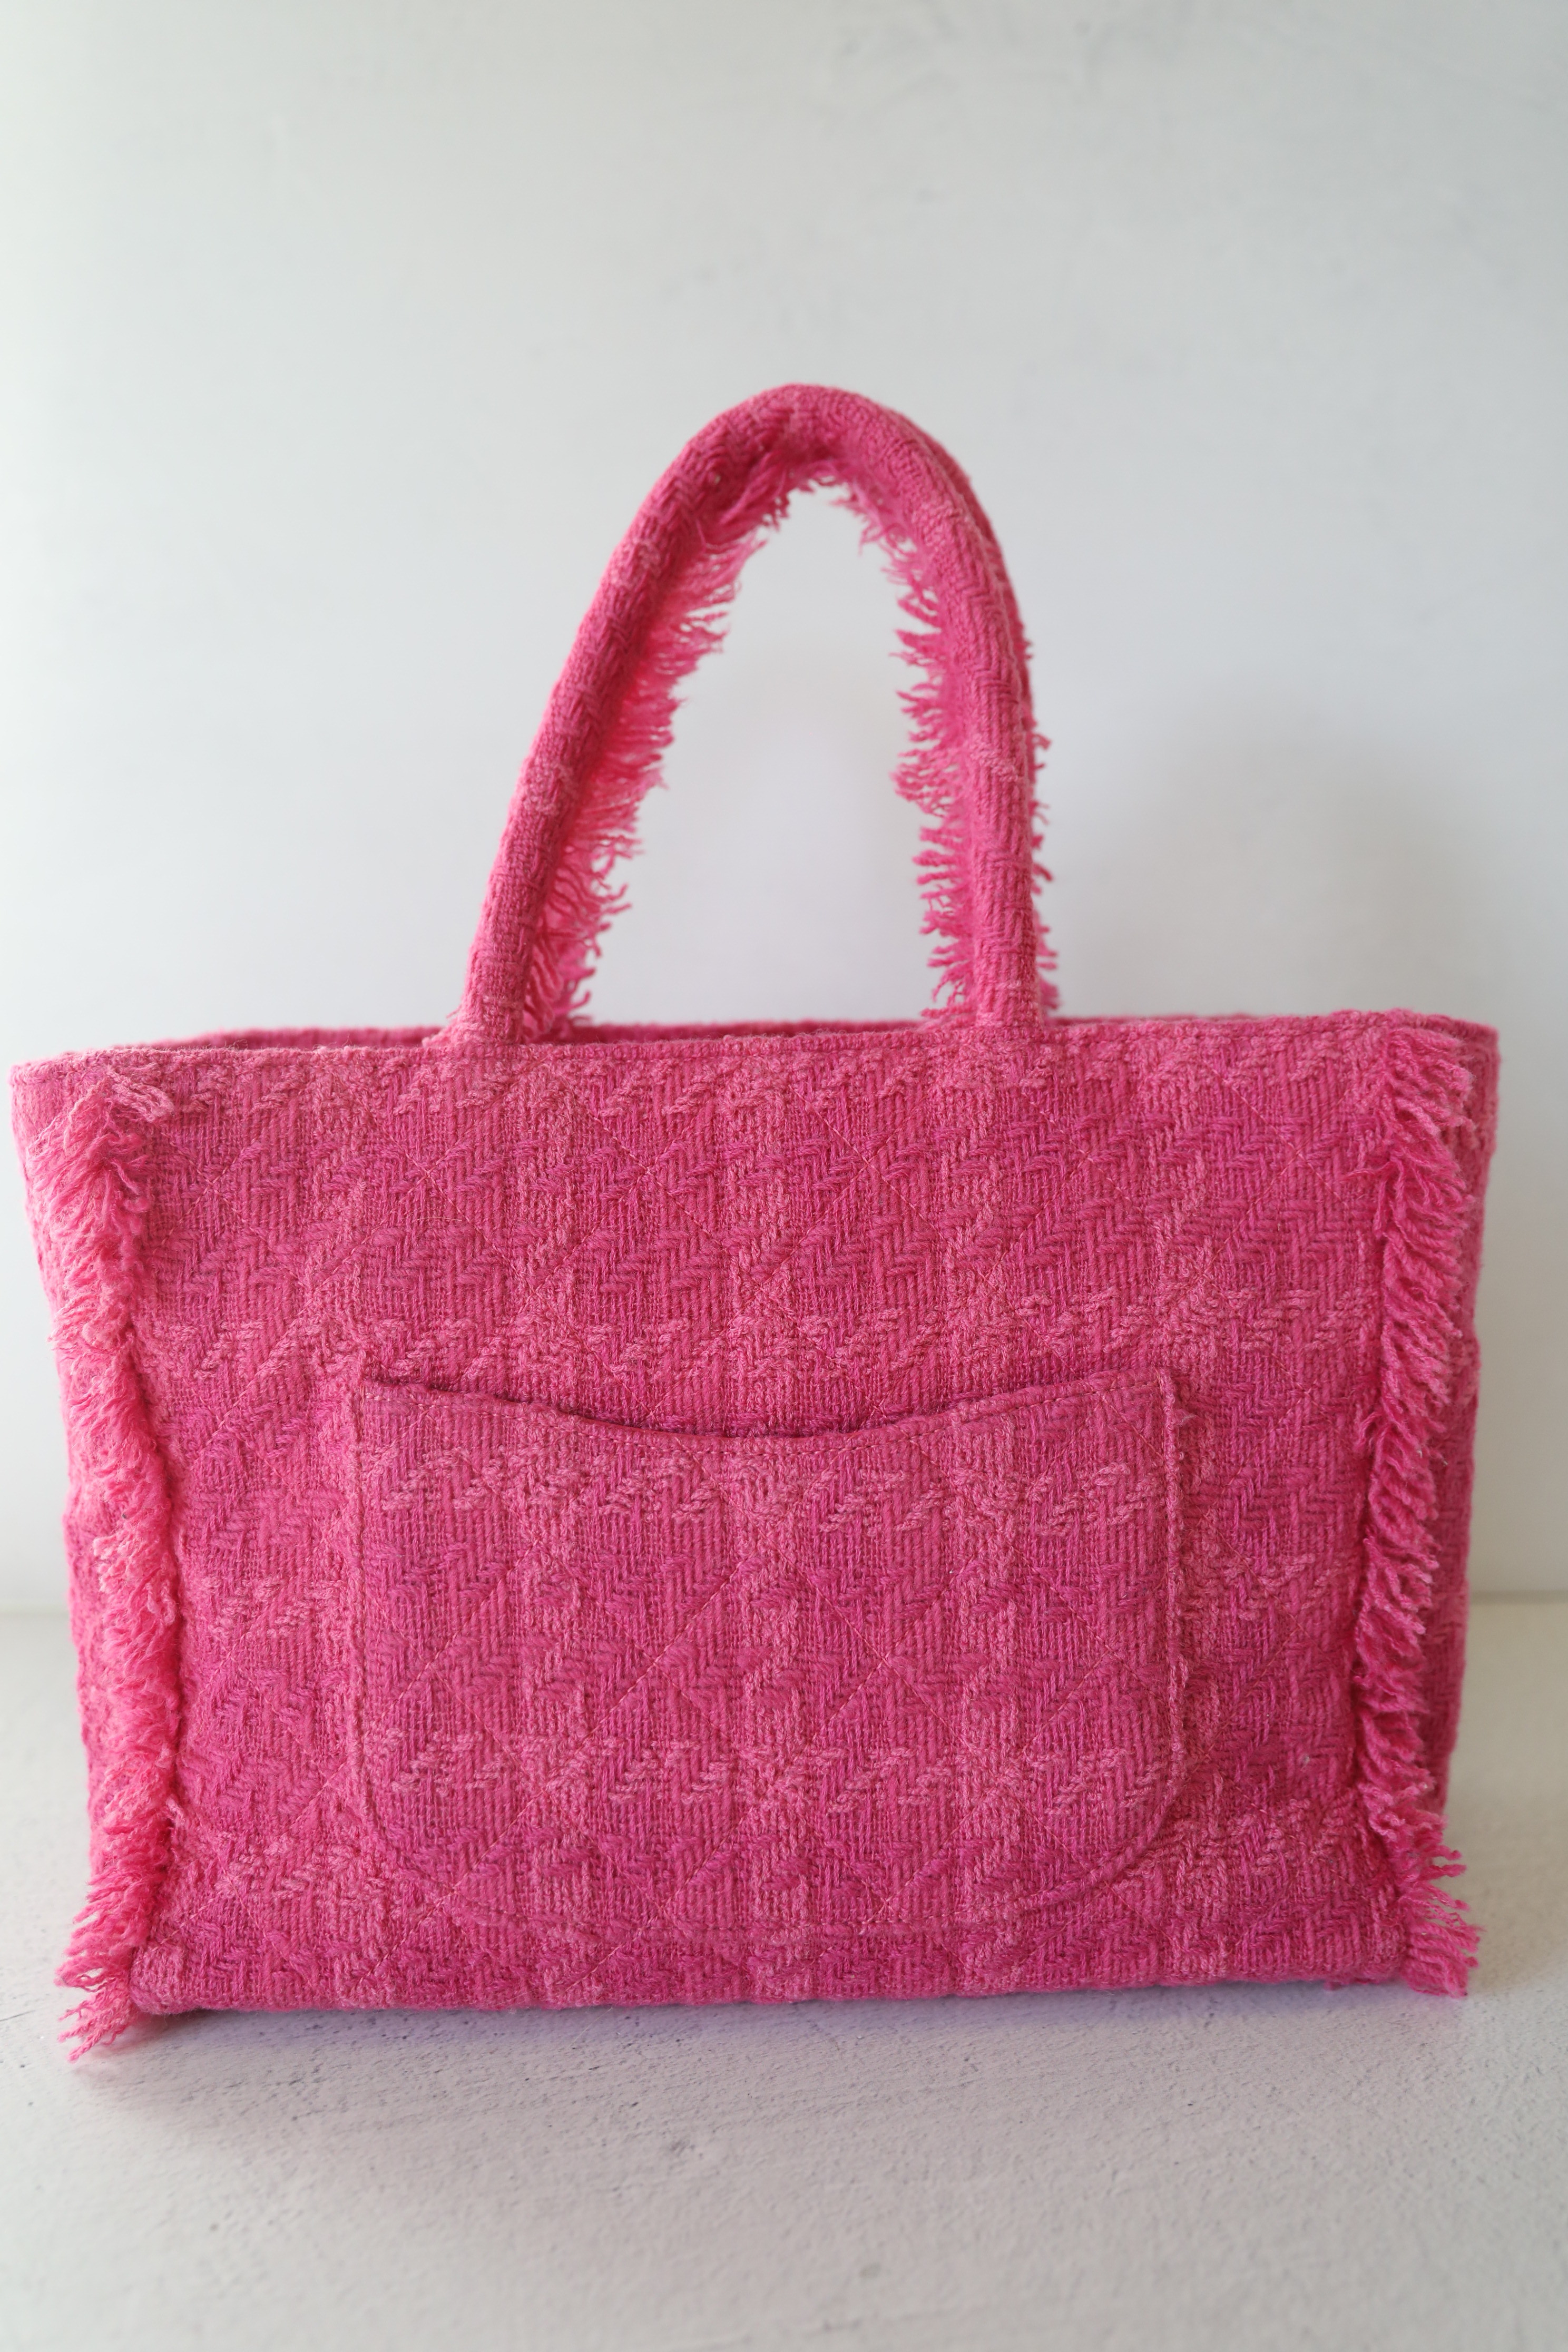 Chanel 22 Tote Medium, Pink Leather with Gold Hardware, Preowned in Dustbag  CMA001 - Julia Rose Boston